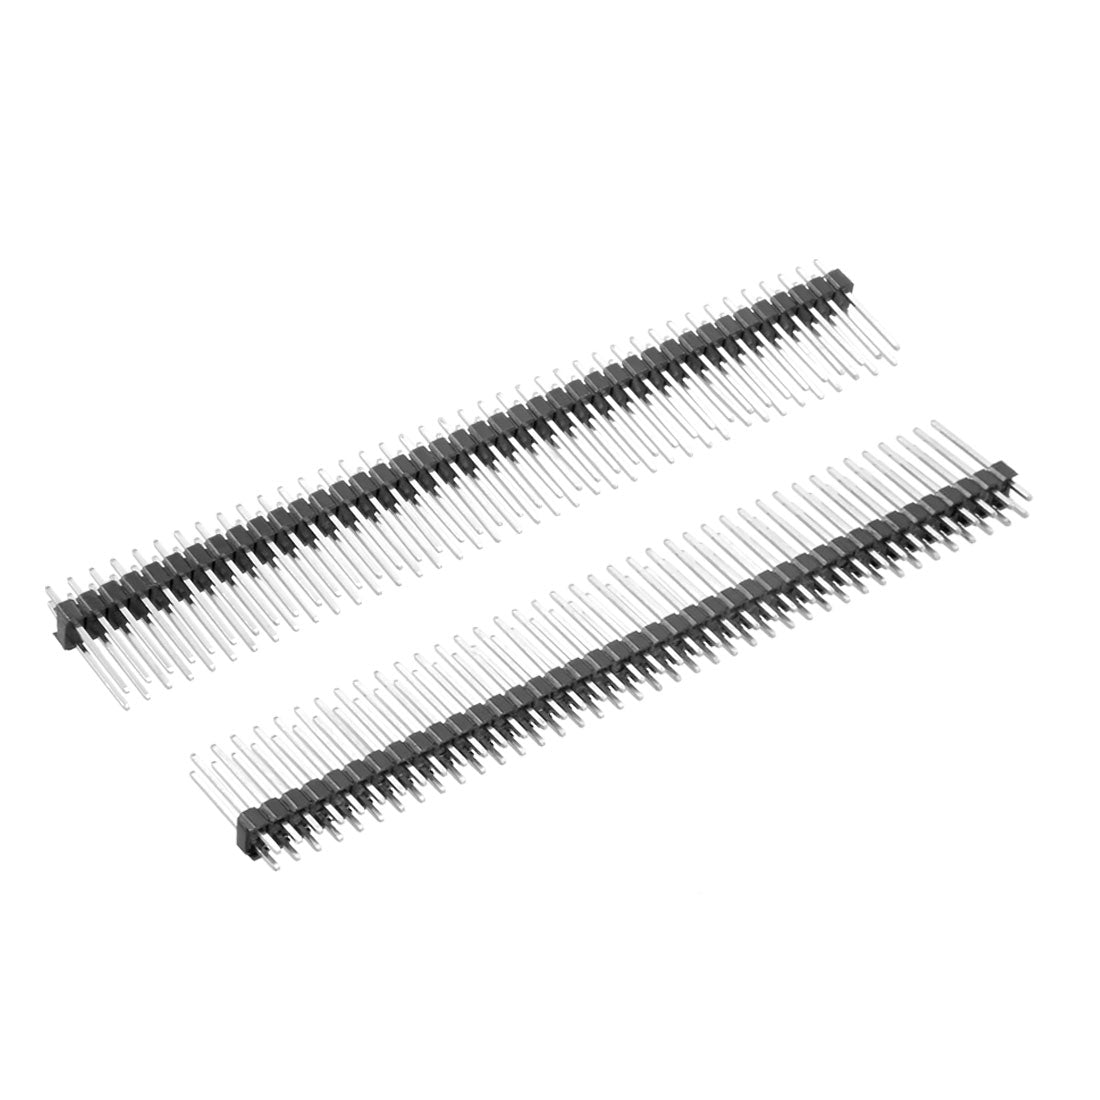 uxcell Uxcell 5Pcs 2.54mm Pitch 40-Pin 19mm Length Double Row Straight Connector Pin Header Strip for Arduino Prototype Shield